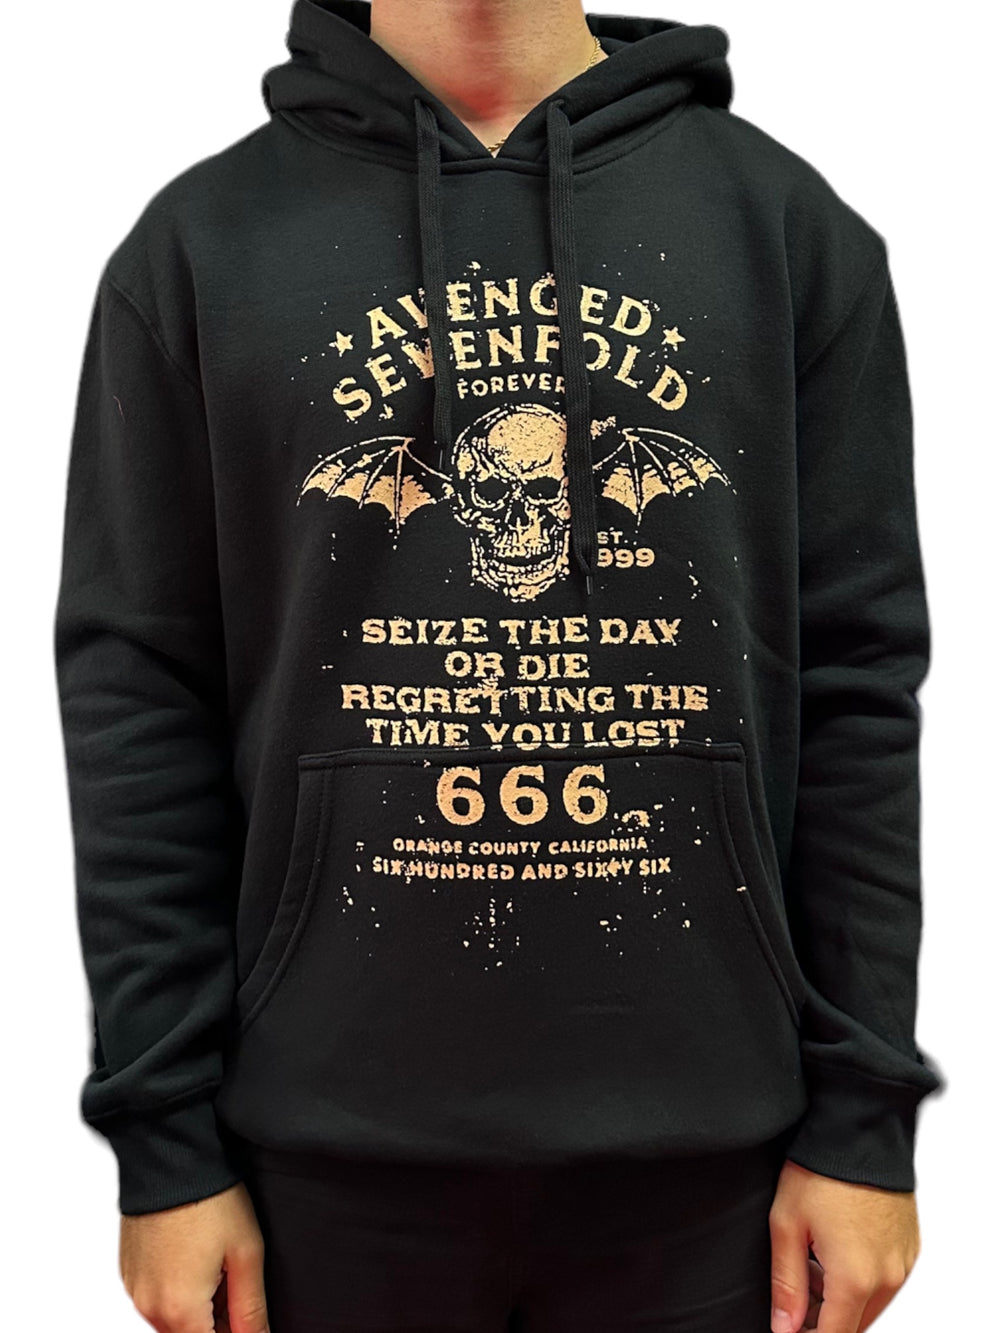 Avenged Sevenfold Seize The Day Pullover Hoodie Unisex Official Brand New Various Sizes